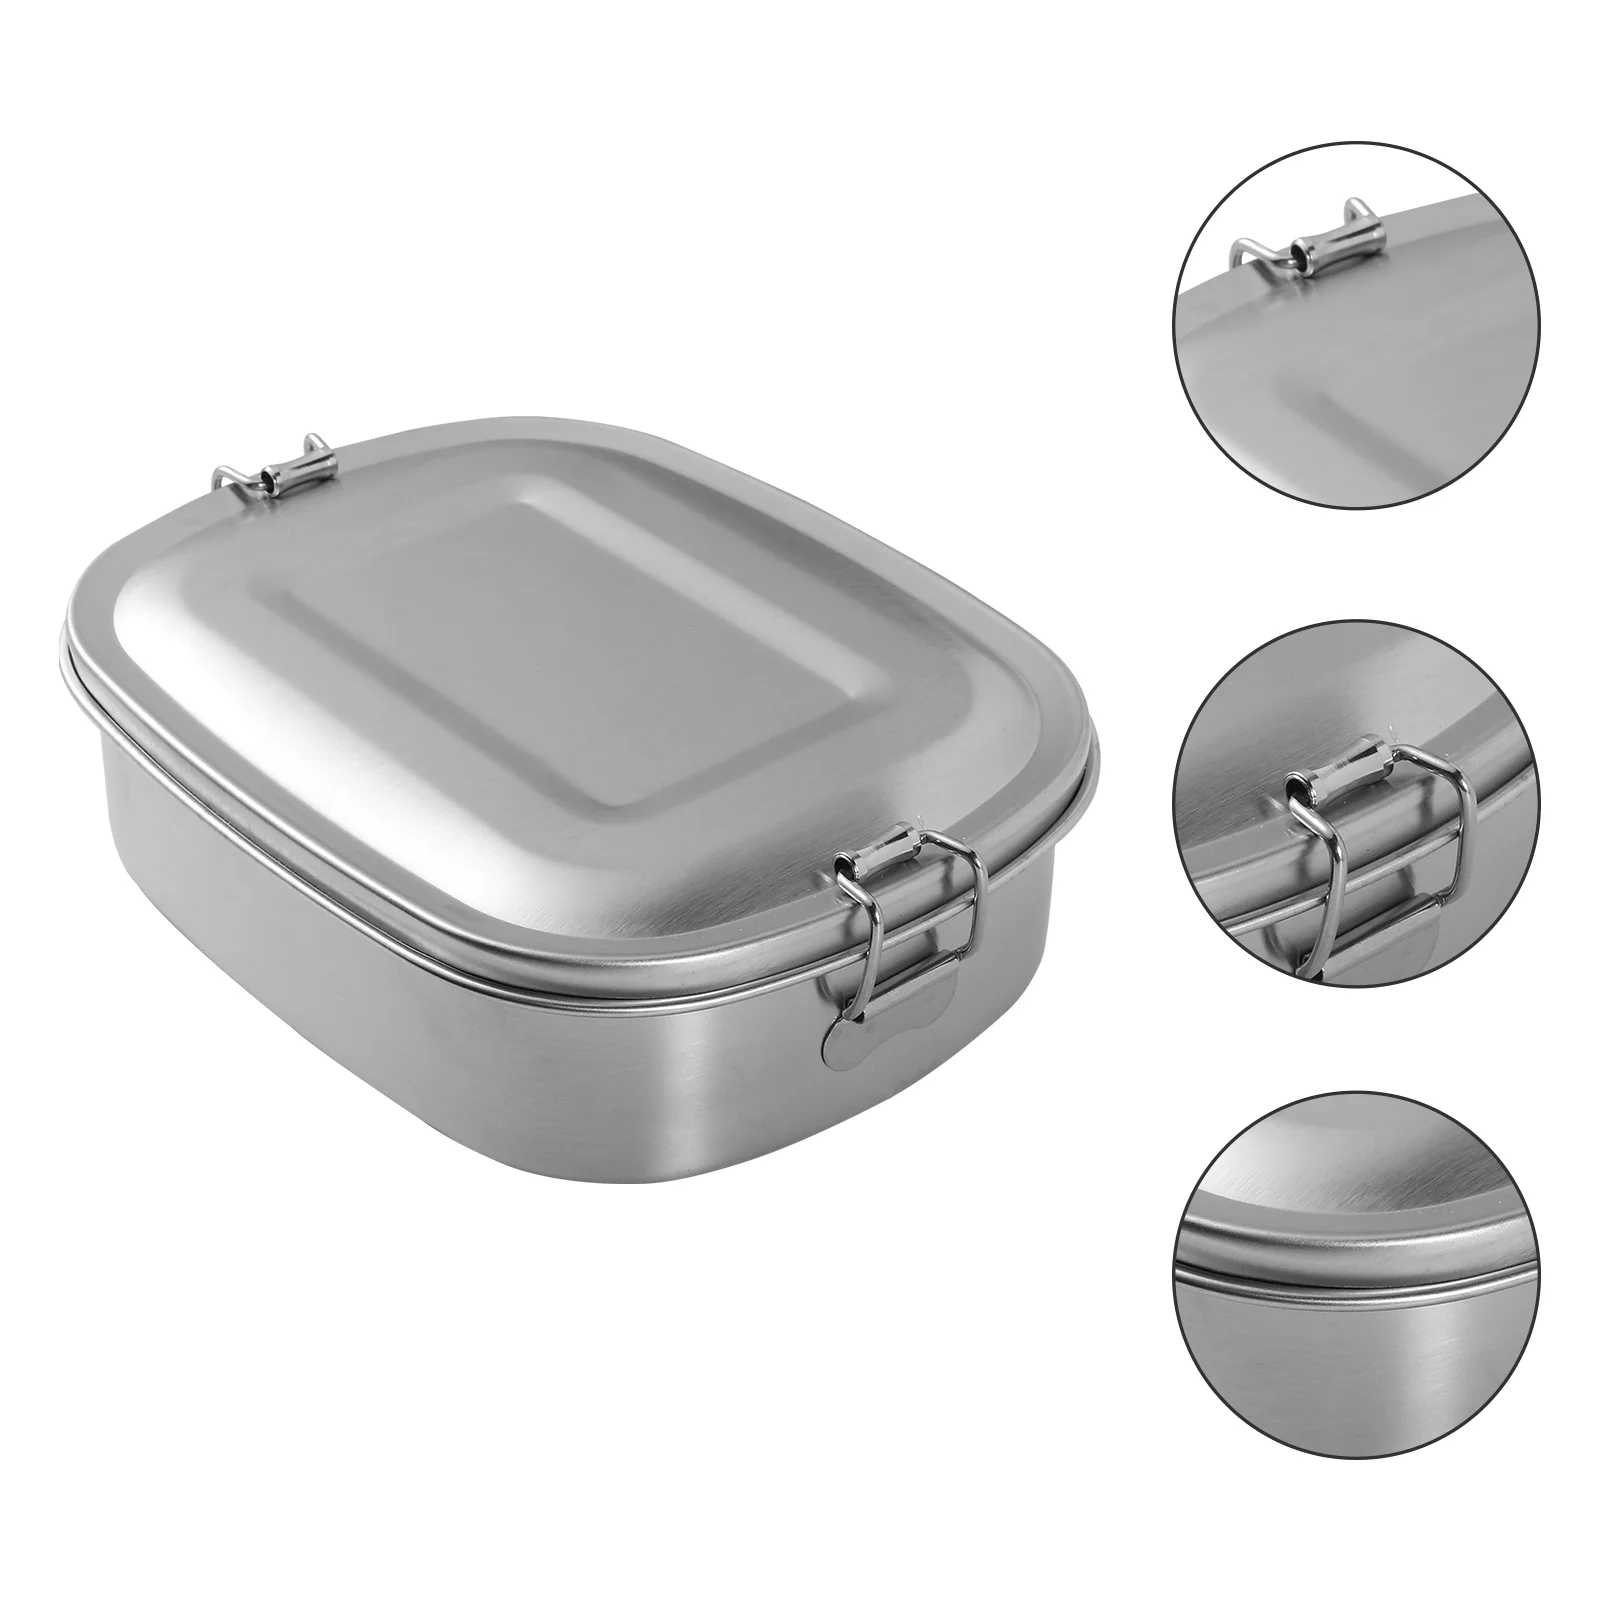 

650 ML Lunch Box Snack Container Metal Lunch Bento Storage Box Food Meal Storage Bento Stainless Steel Outdoor Bento Box Travel